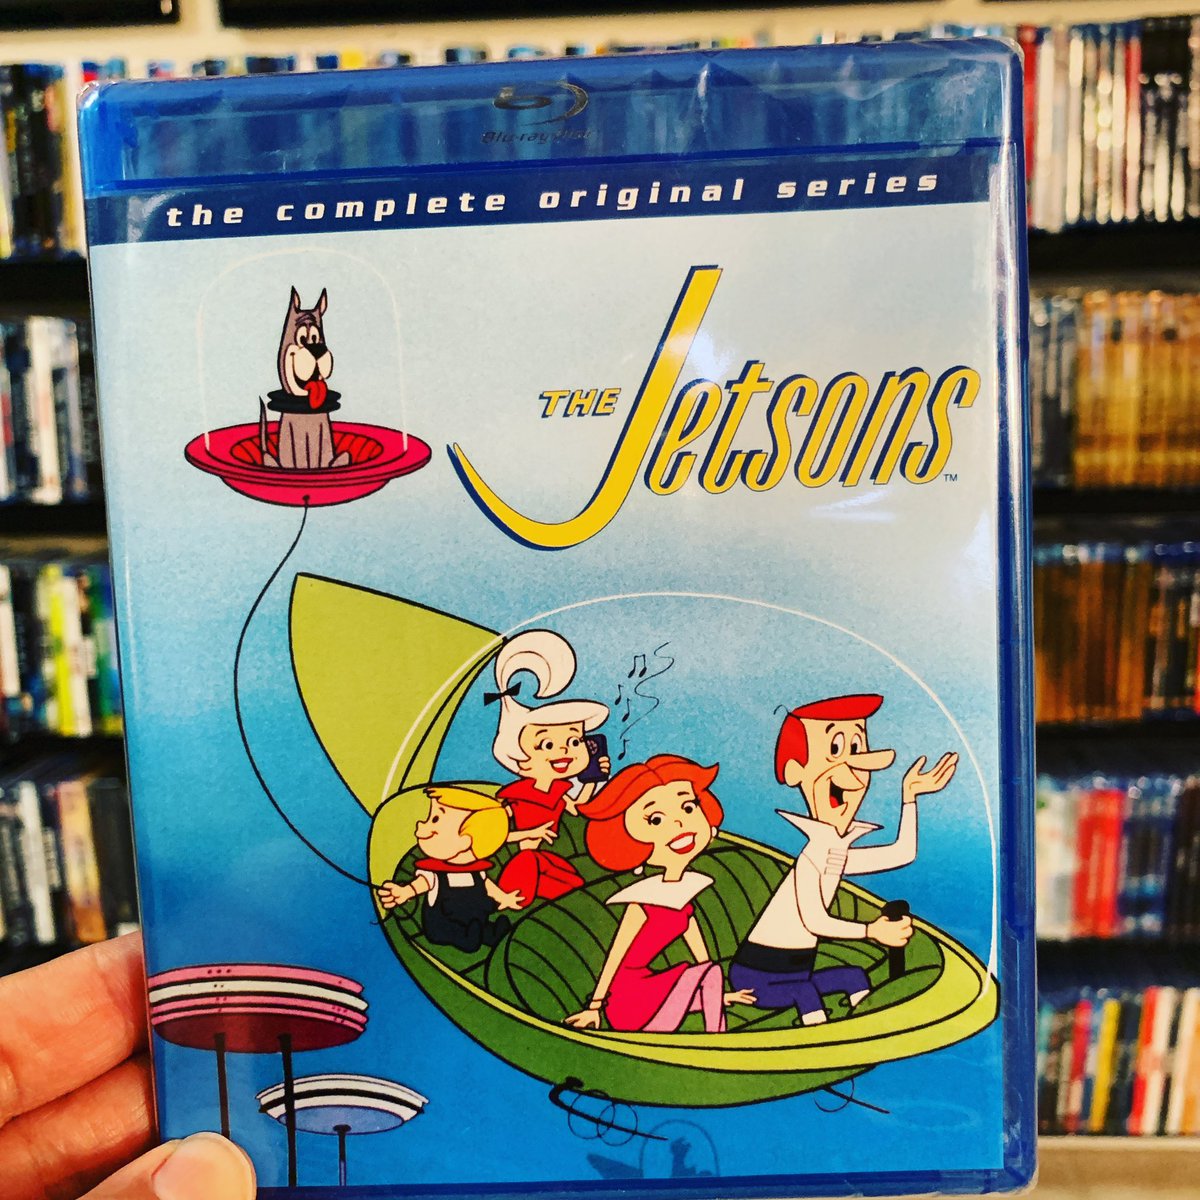 Please give us more #hannabarbera #blurays @warnerarchive we need them ALL. I’m really happy to add #thejetsons the Complete Original series on #Bluray to my #bluraycollection. 
#hannabarberacartoons #warnerarchive #warnerarchivecollection